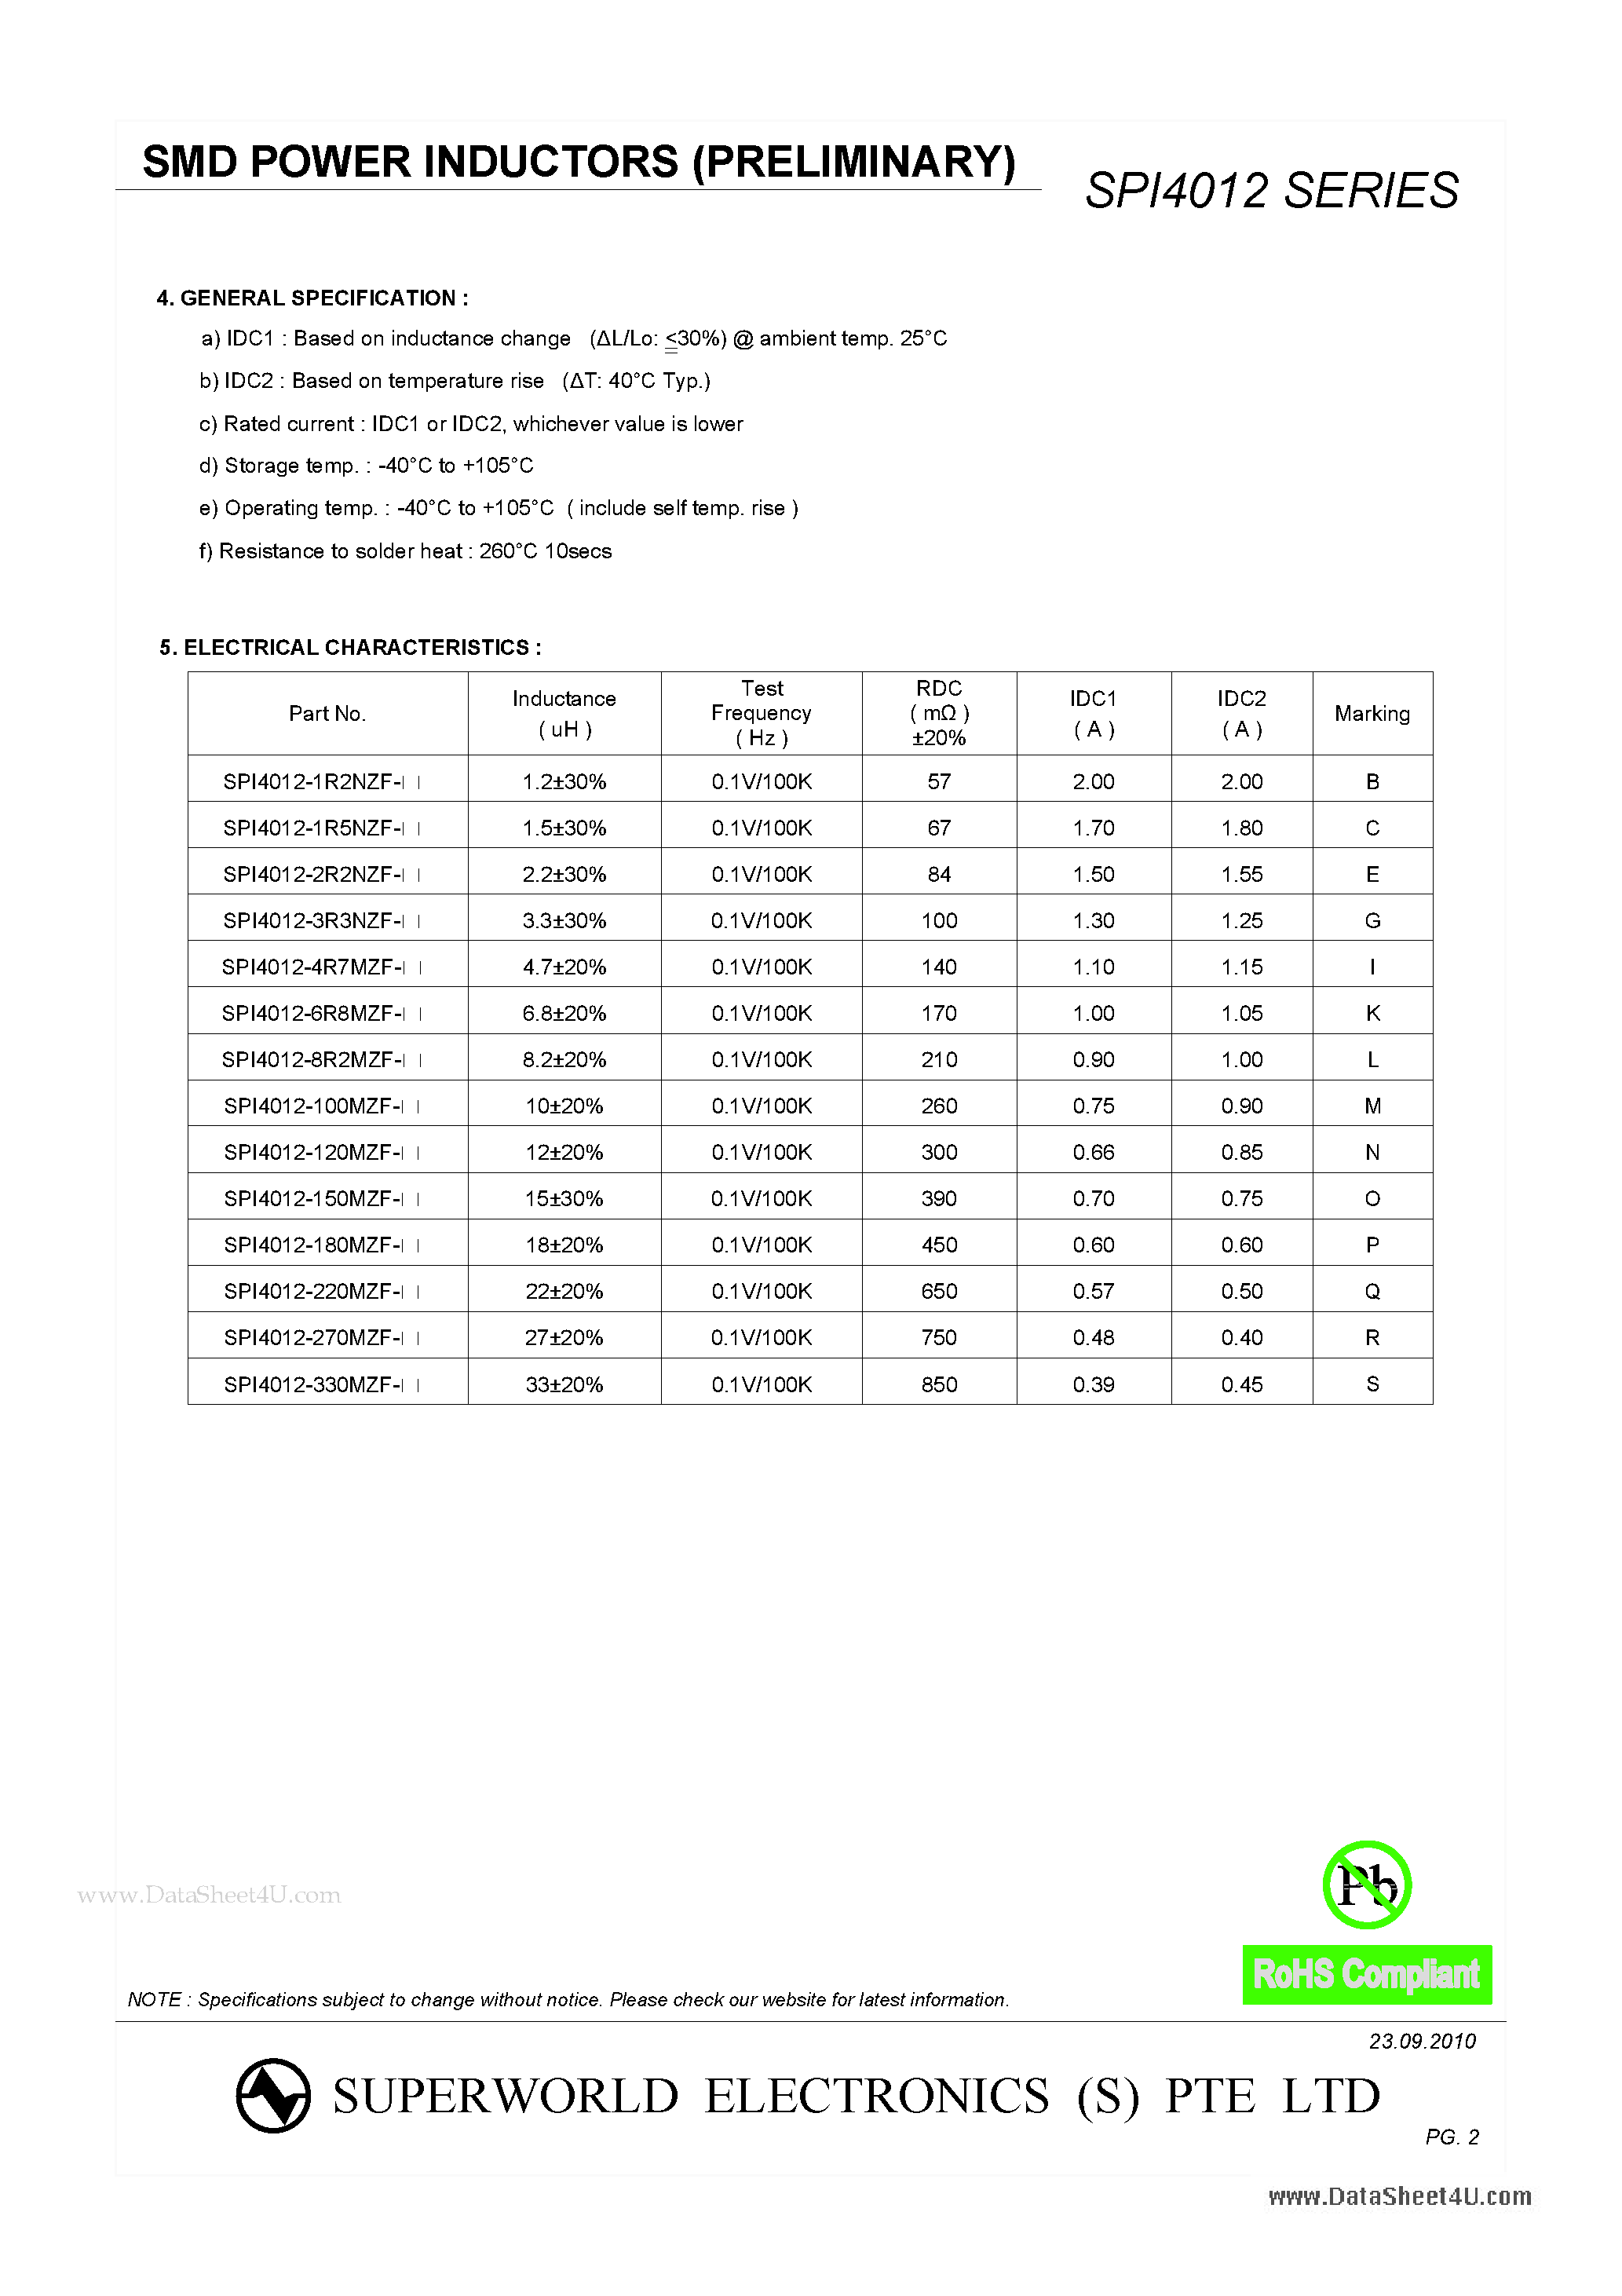 Datasheet SPI4012 - SMD POWER INDUCTORS page 2